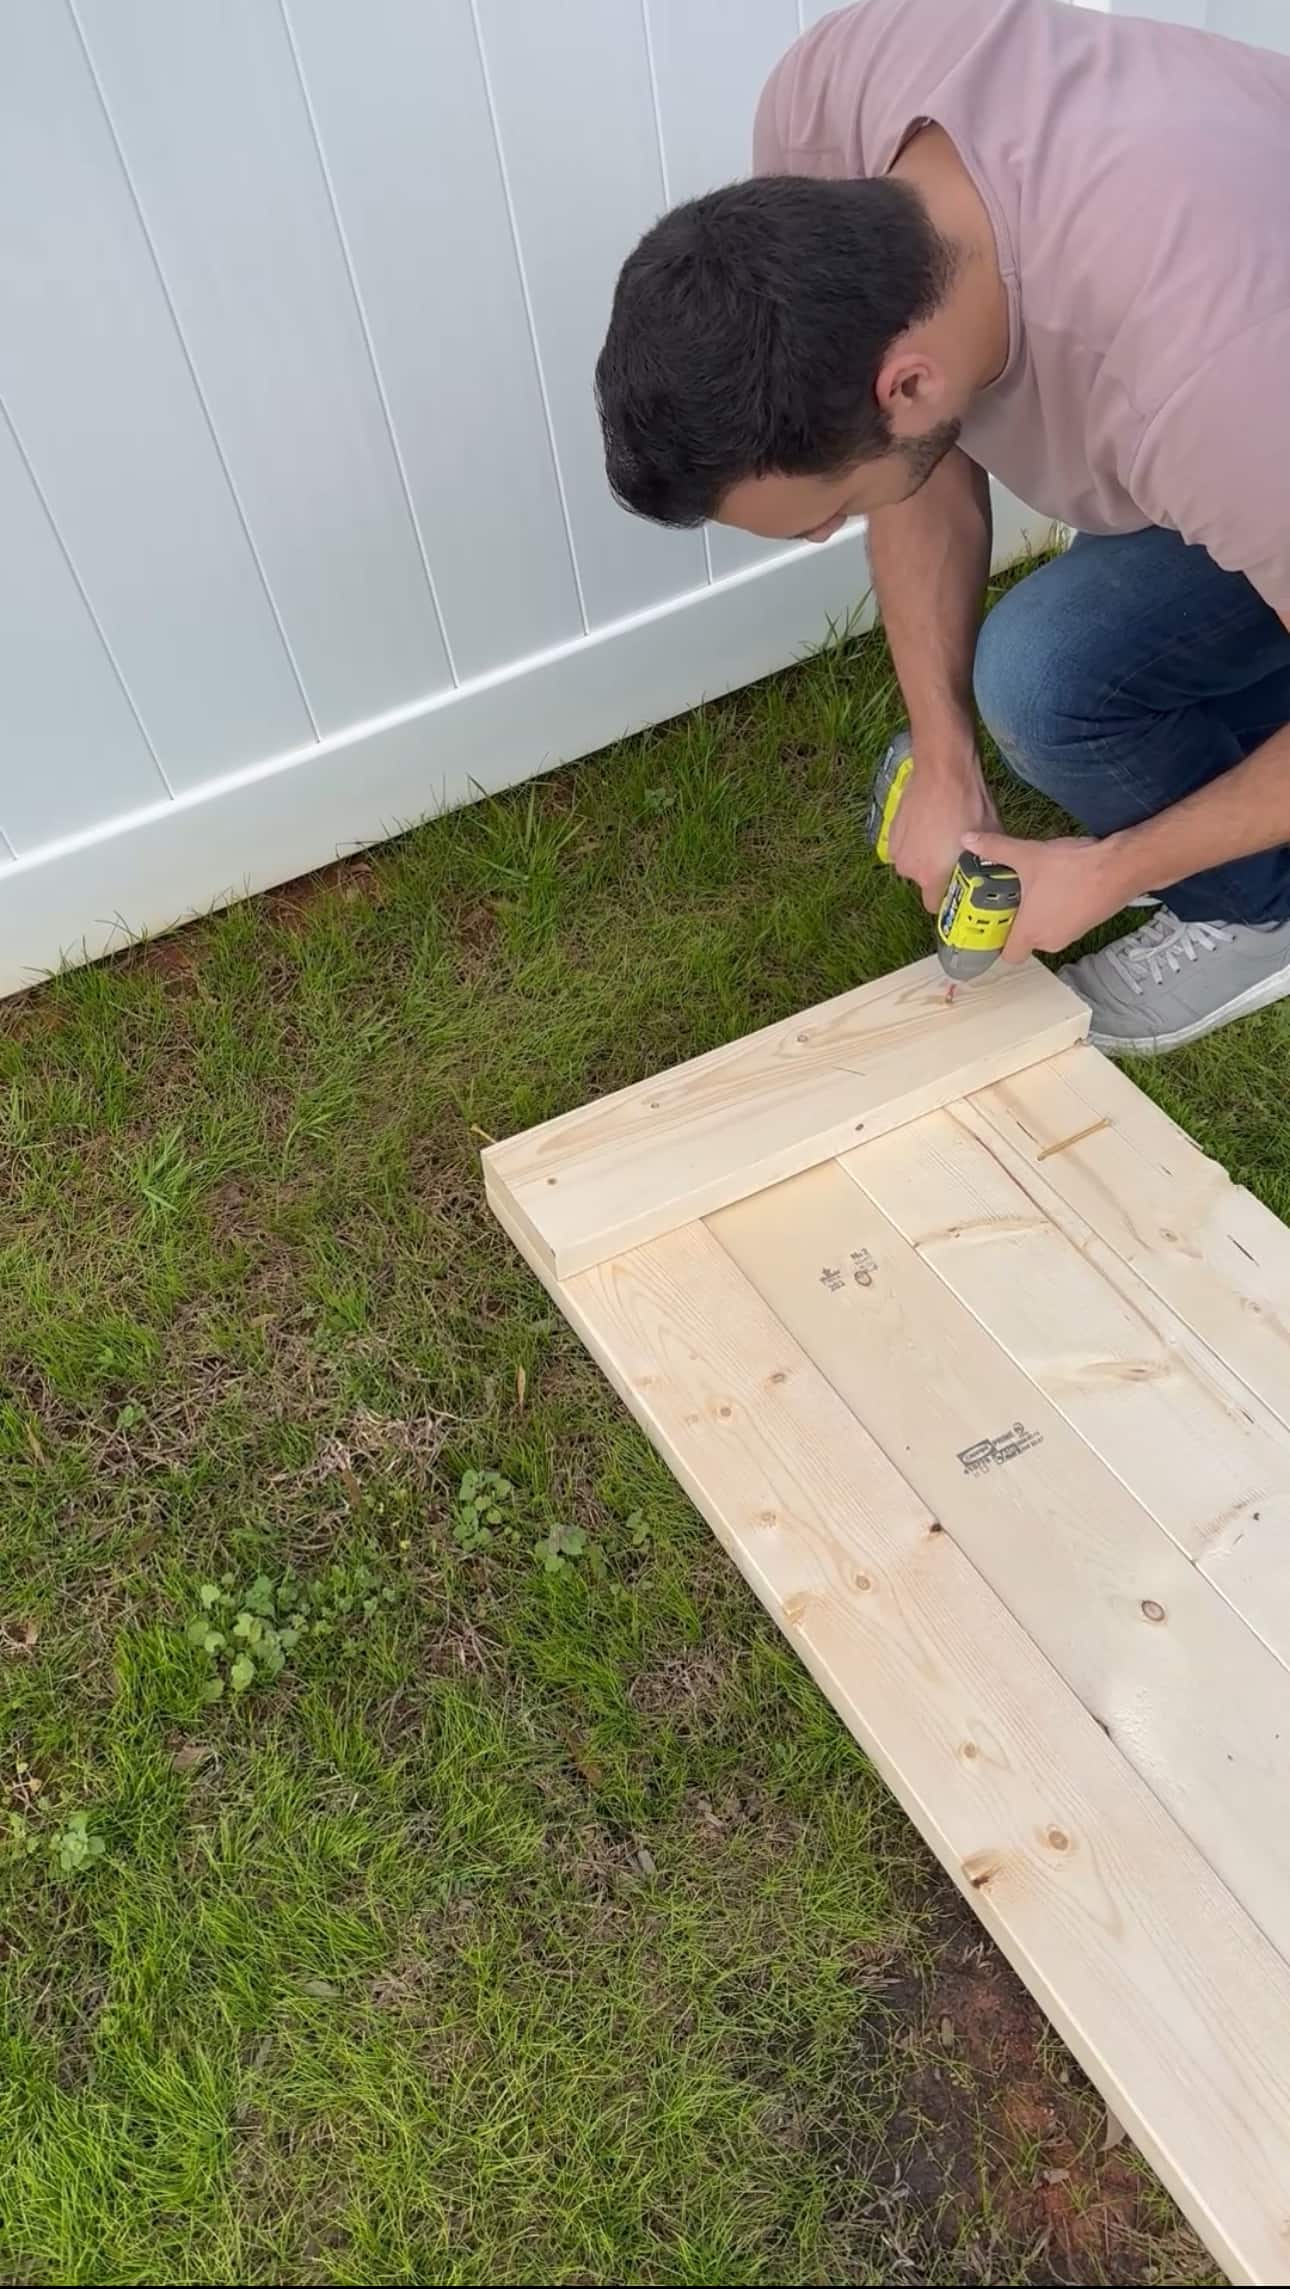 Clayton builds and assembles his raised garden bed